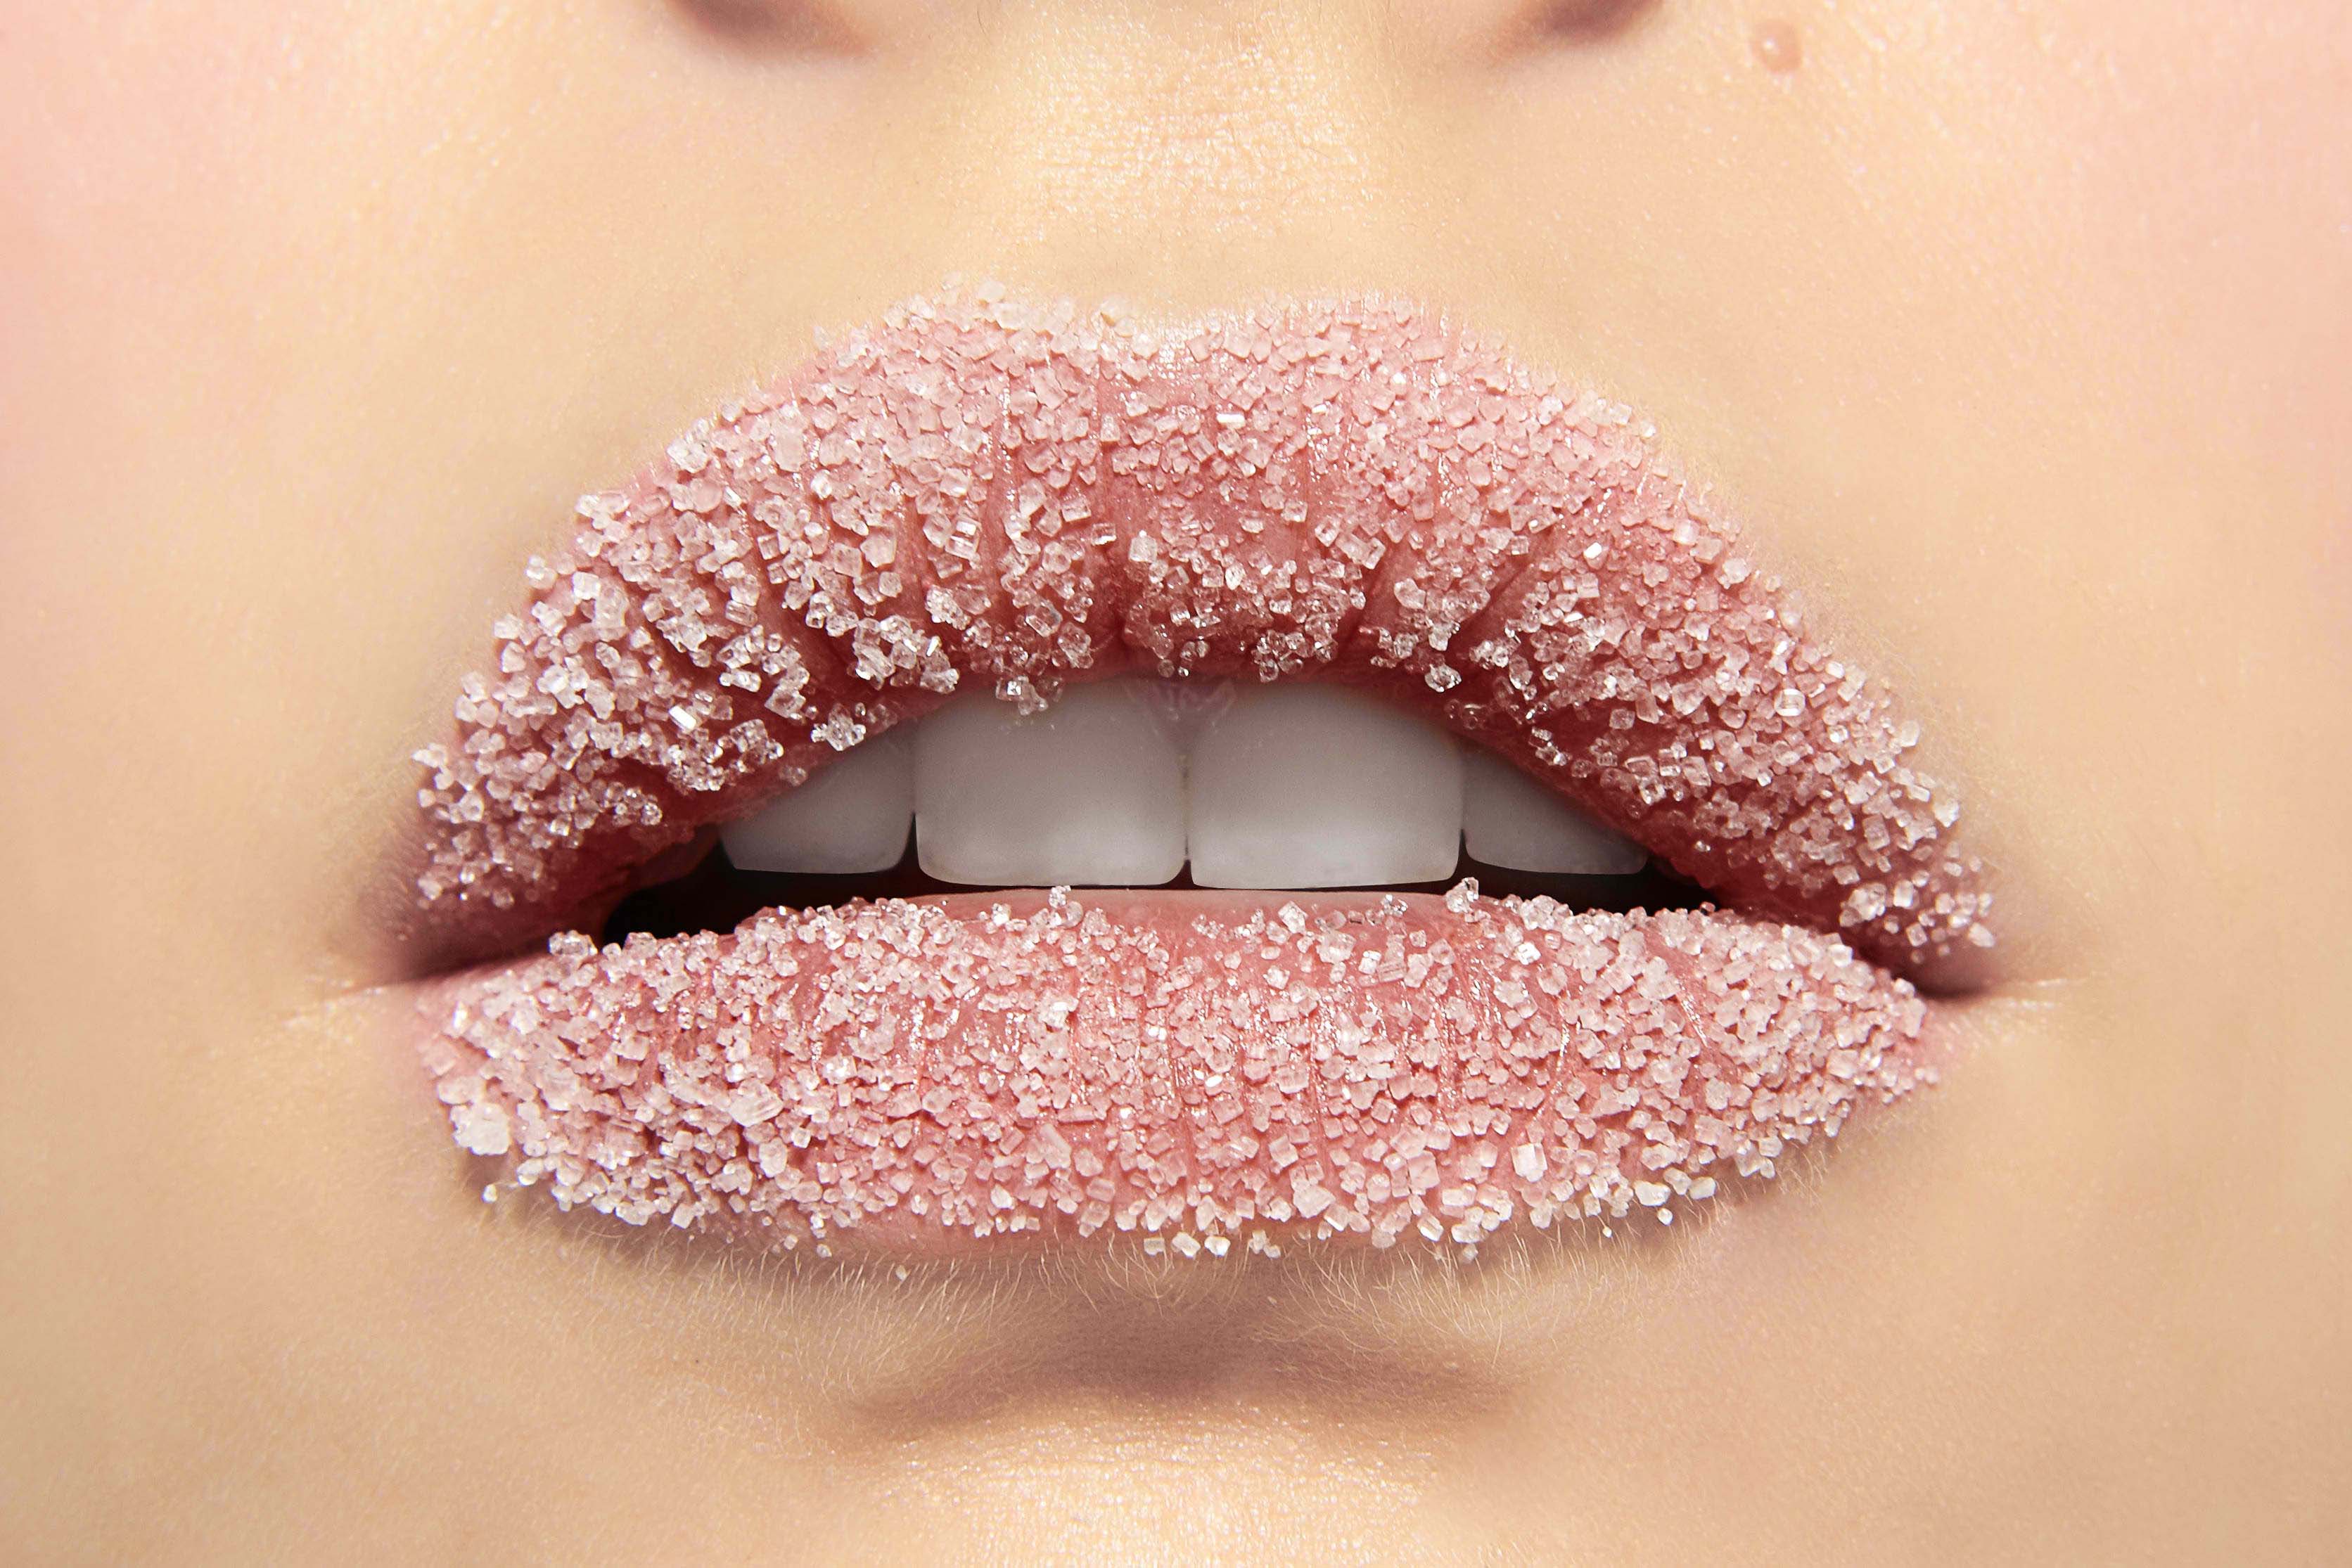 Tips For Chapped Lips